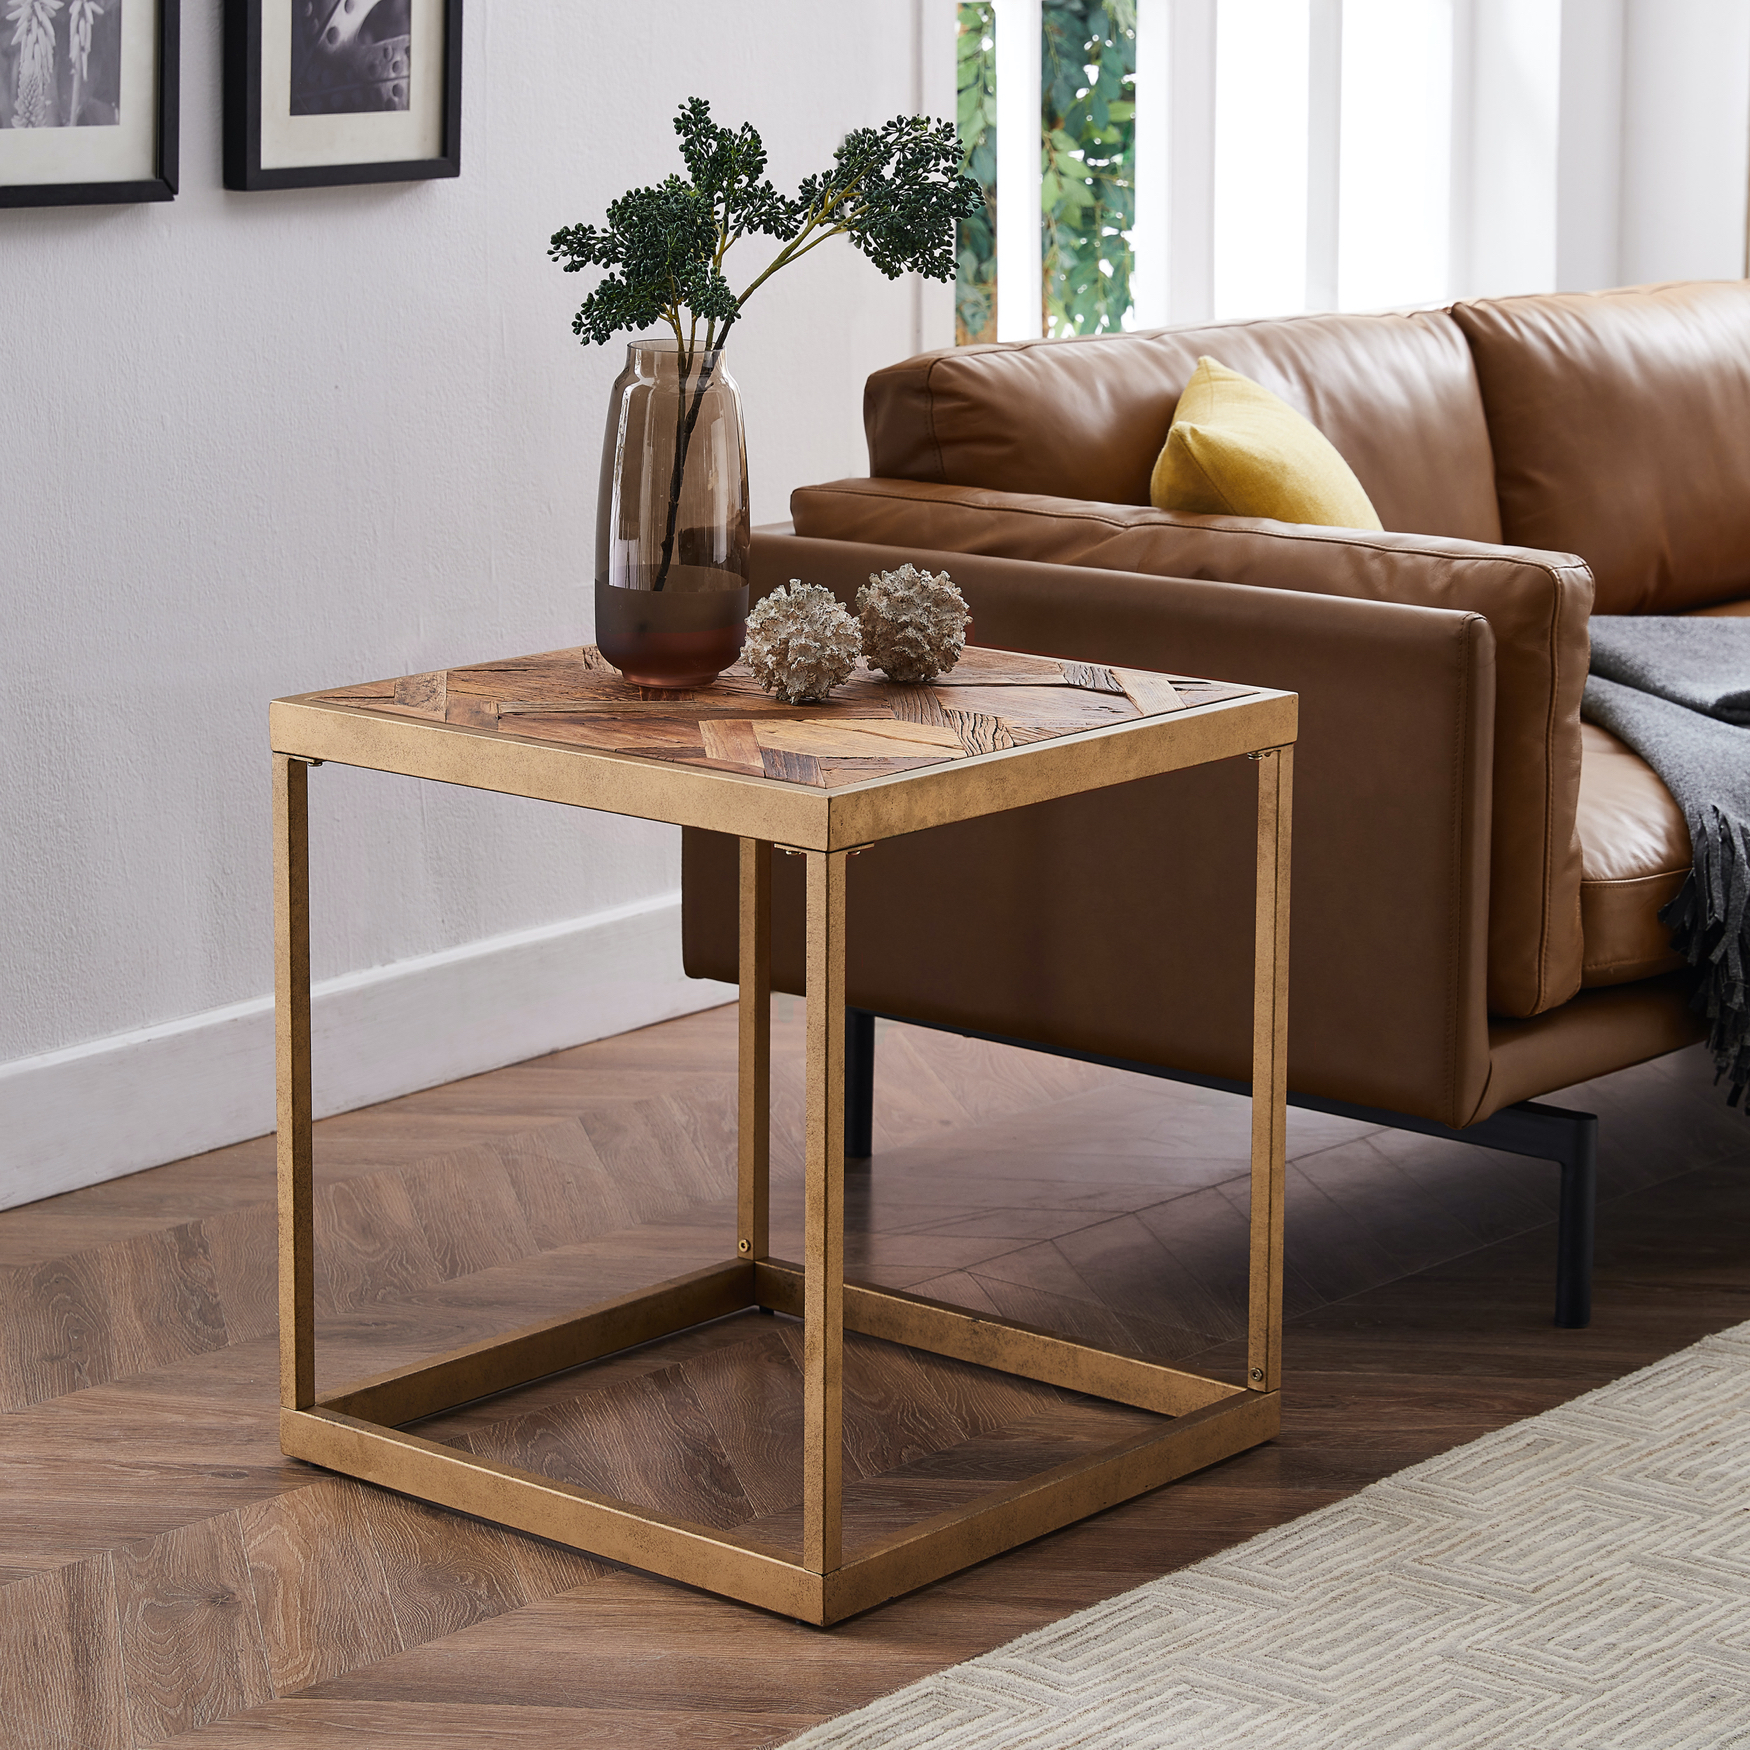 Dorville Reclaimed Wood Patchwork End Table, BROWN